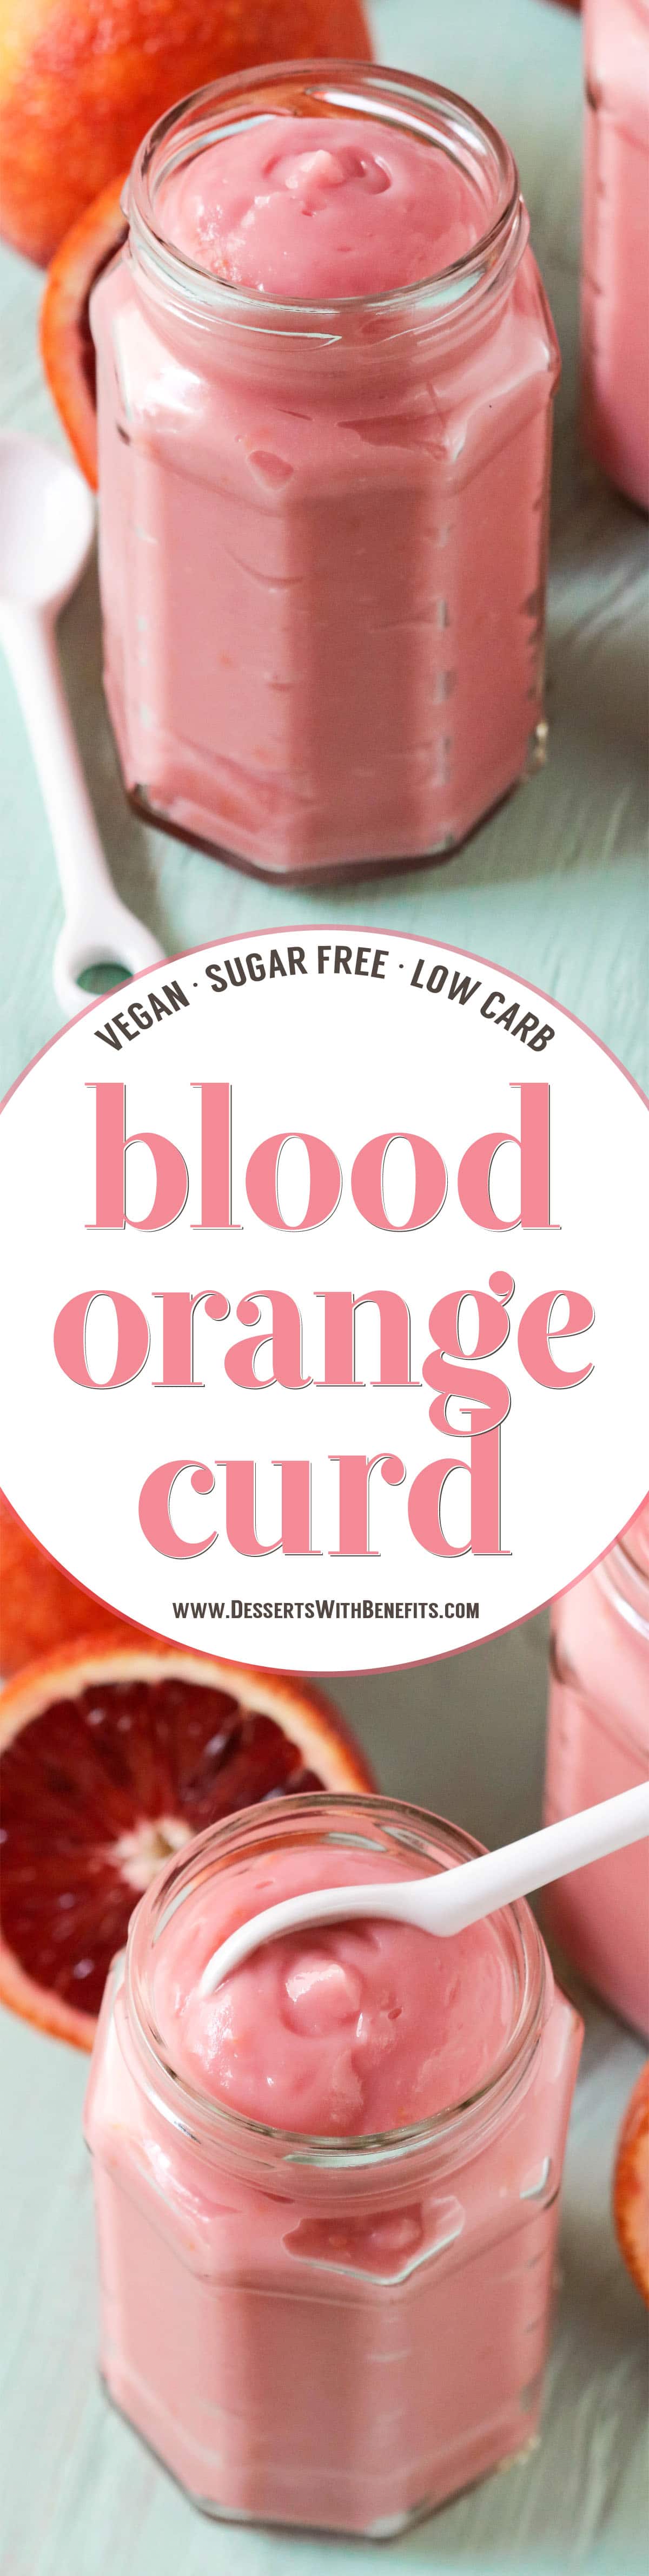 This Healthy Blood Orange Curd is ultra creamy, sweet, tart, and delicious.  You'd never know it's sugar free, low carb, low fat, gluten free, dairy free, and vegan!  Scoop it over yogurt, layer it in parfaits, spoon some over Vanilla Ice Cream, or dig in straight up with a spoon.